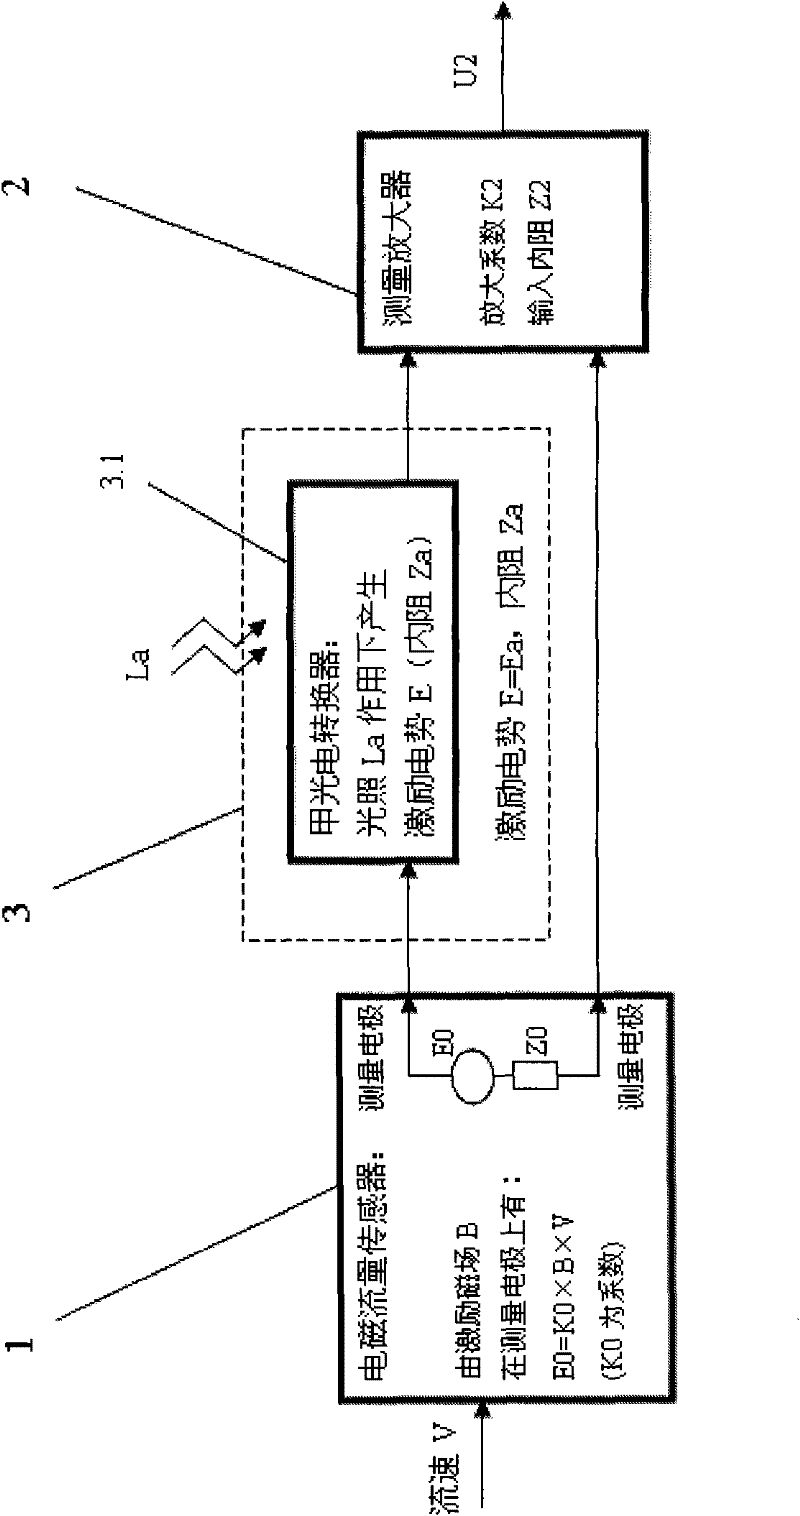 Double-excitation electromagnetic flow meter based on photoelectrical coupling